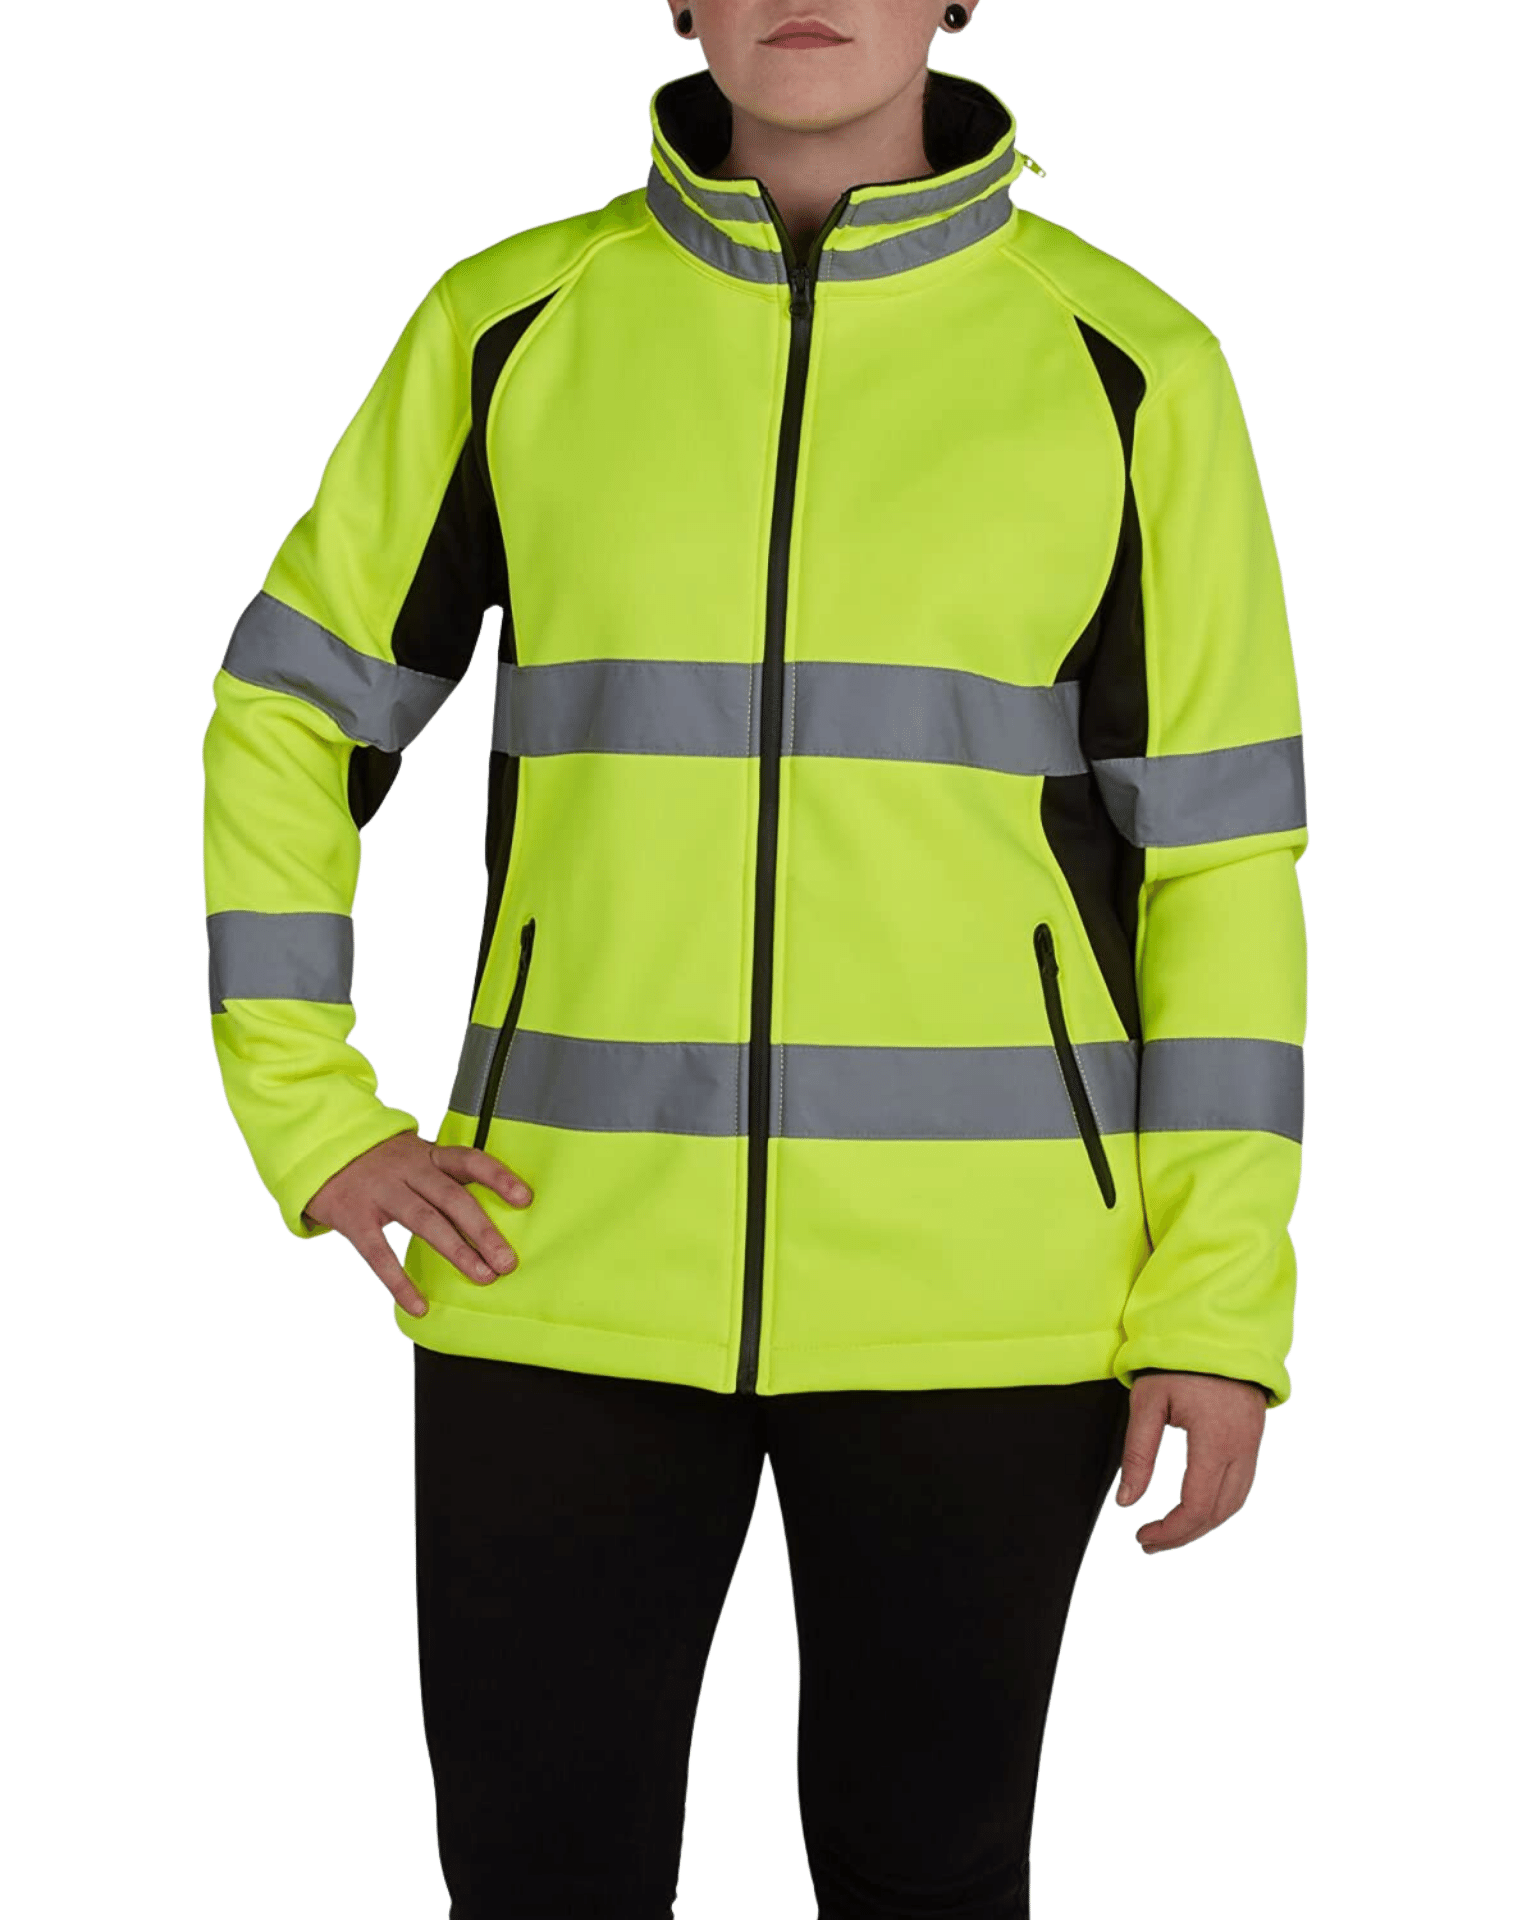 ANSI Class 2 High Visibility Women's soft shell full zip hidden hood polyester jacket by Utility Pro